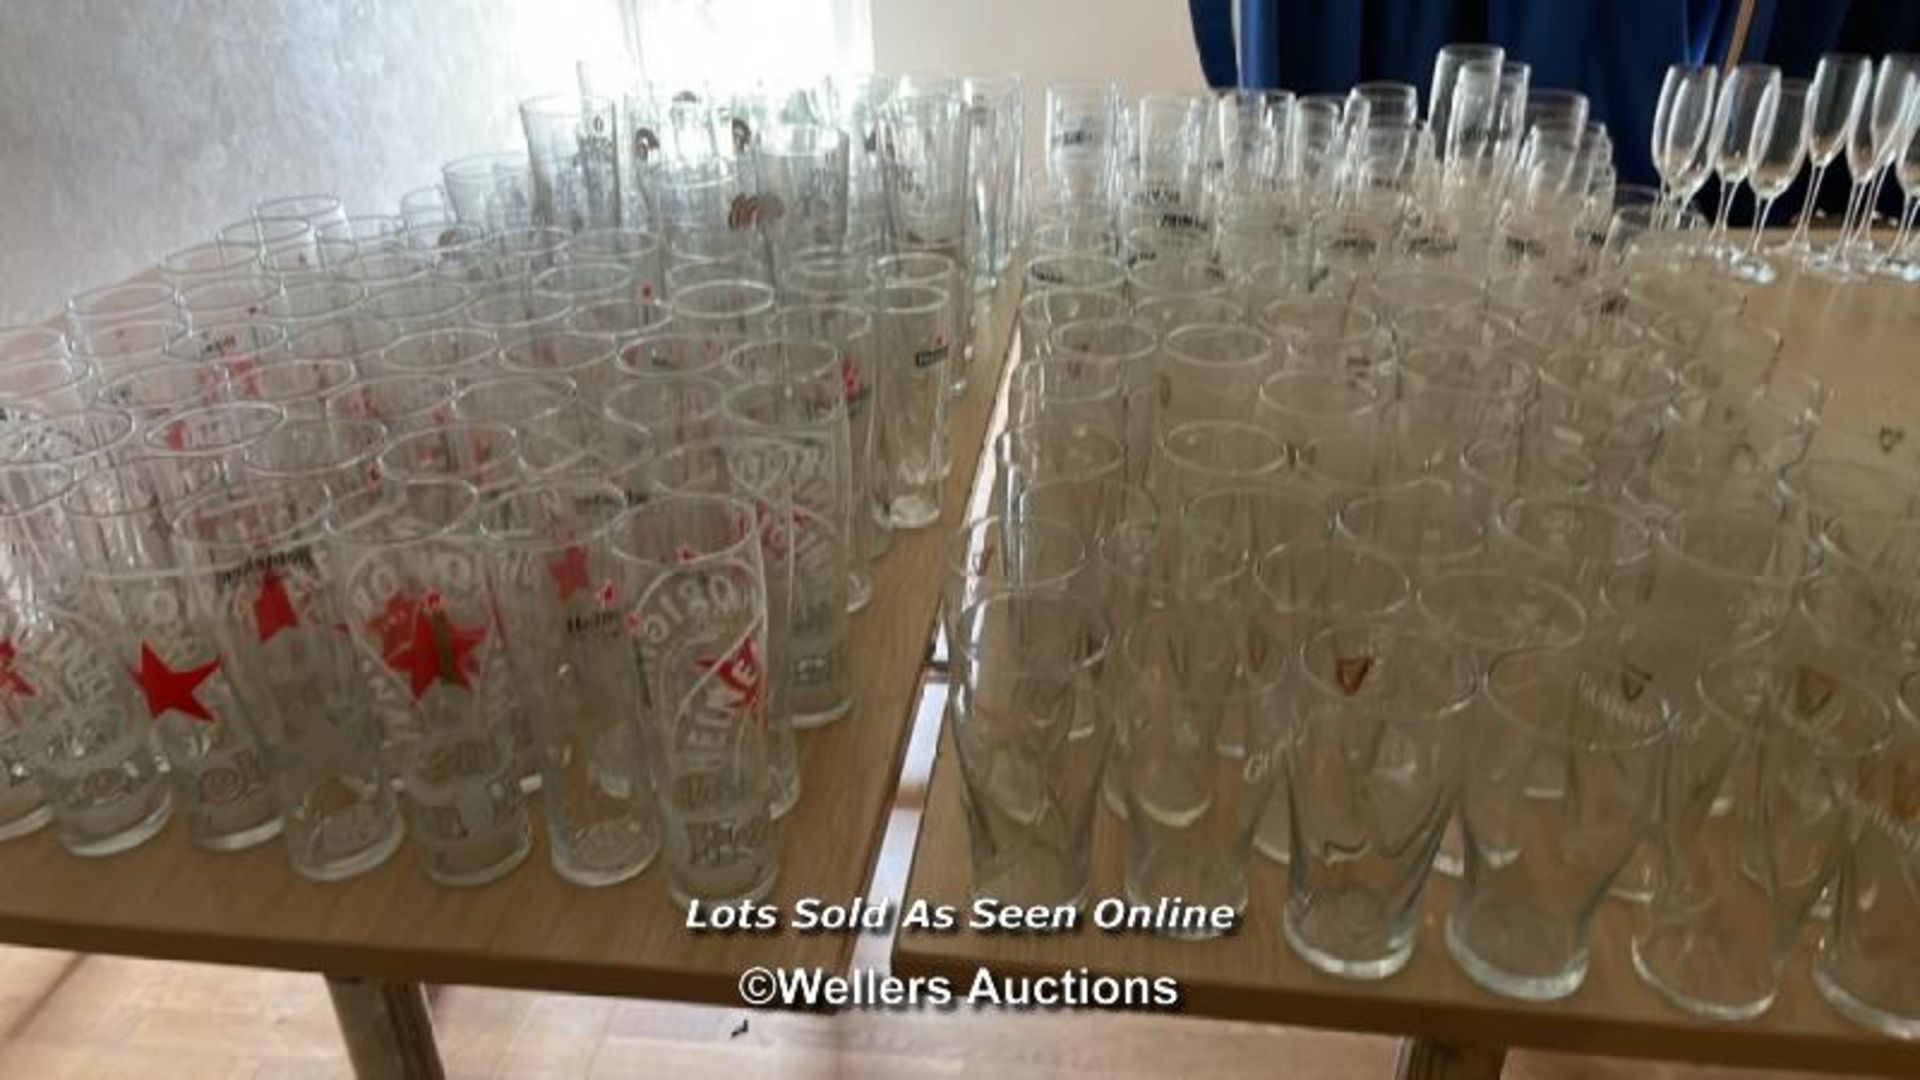 APPROX. 200X PINT GLASSES INCL. GUINNESS, HEINEKEN, BULMERS, JOHN SMITH'S AND MORE / COLLECTION - Image 6 of 6